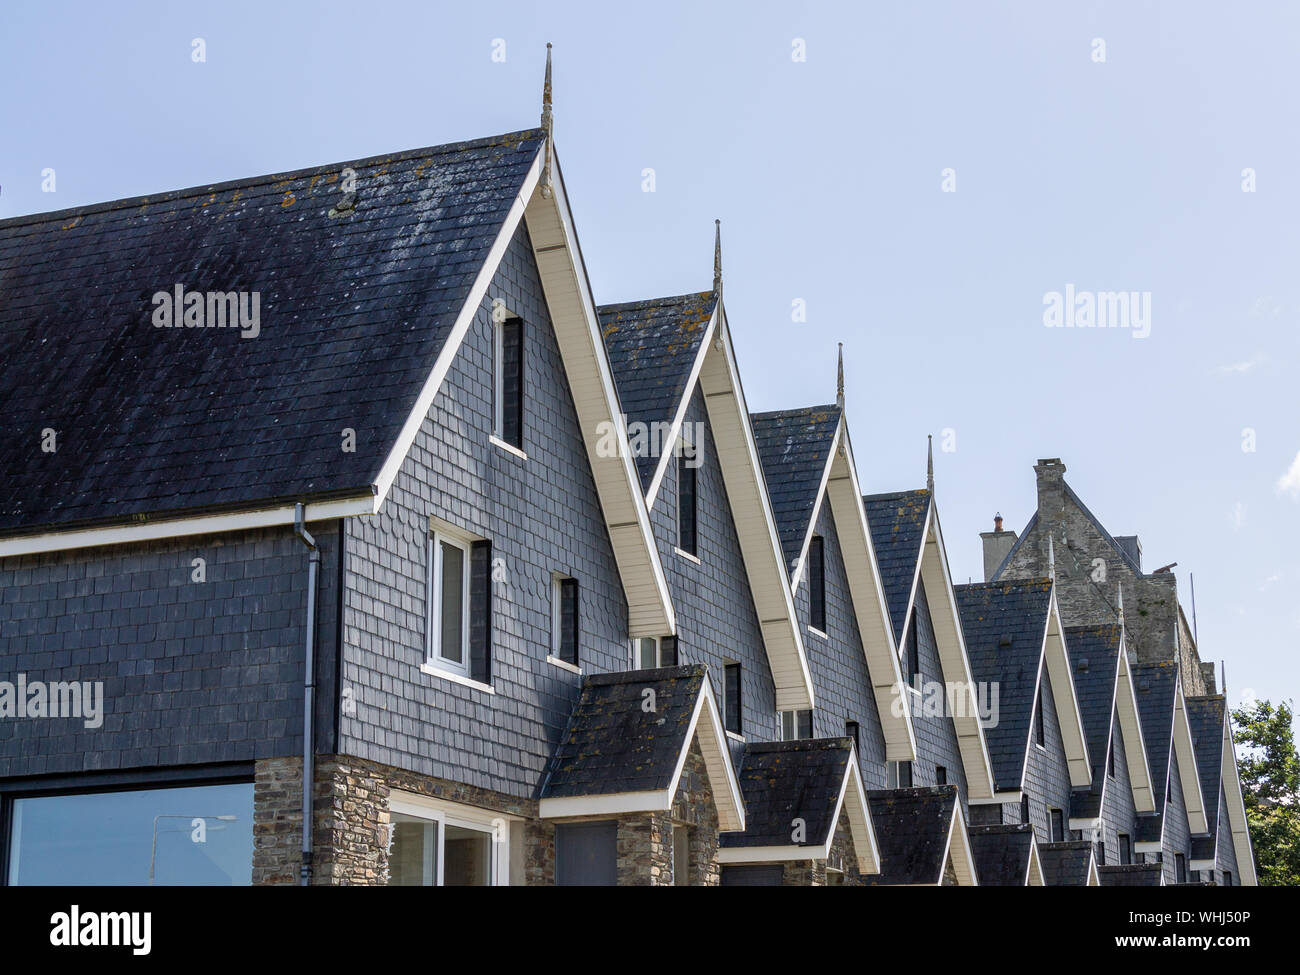 Terraced houses in front of a castle tower. Baltimore Ireland Stock Photo